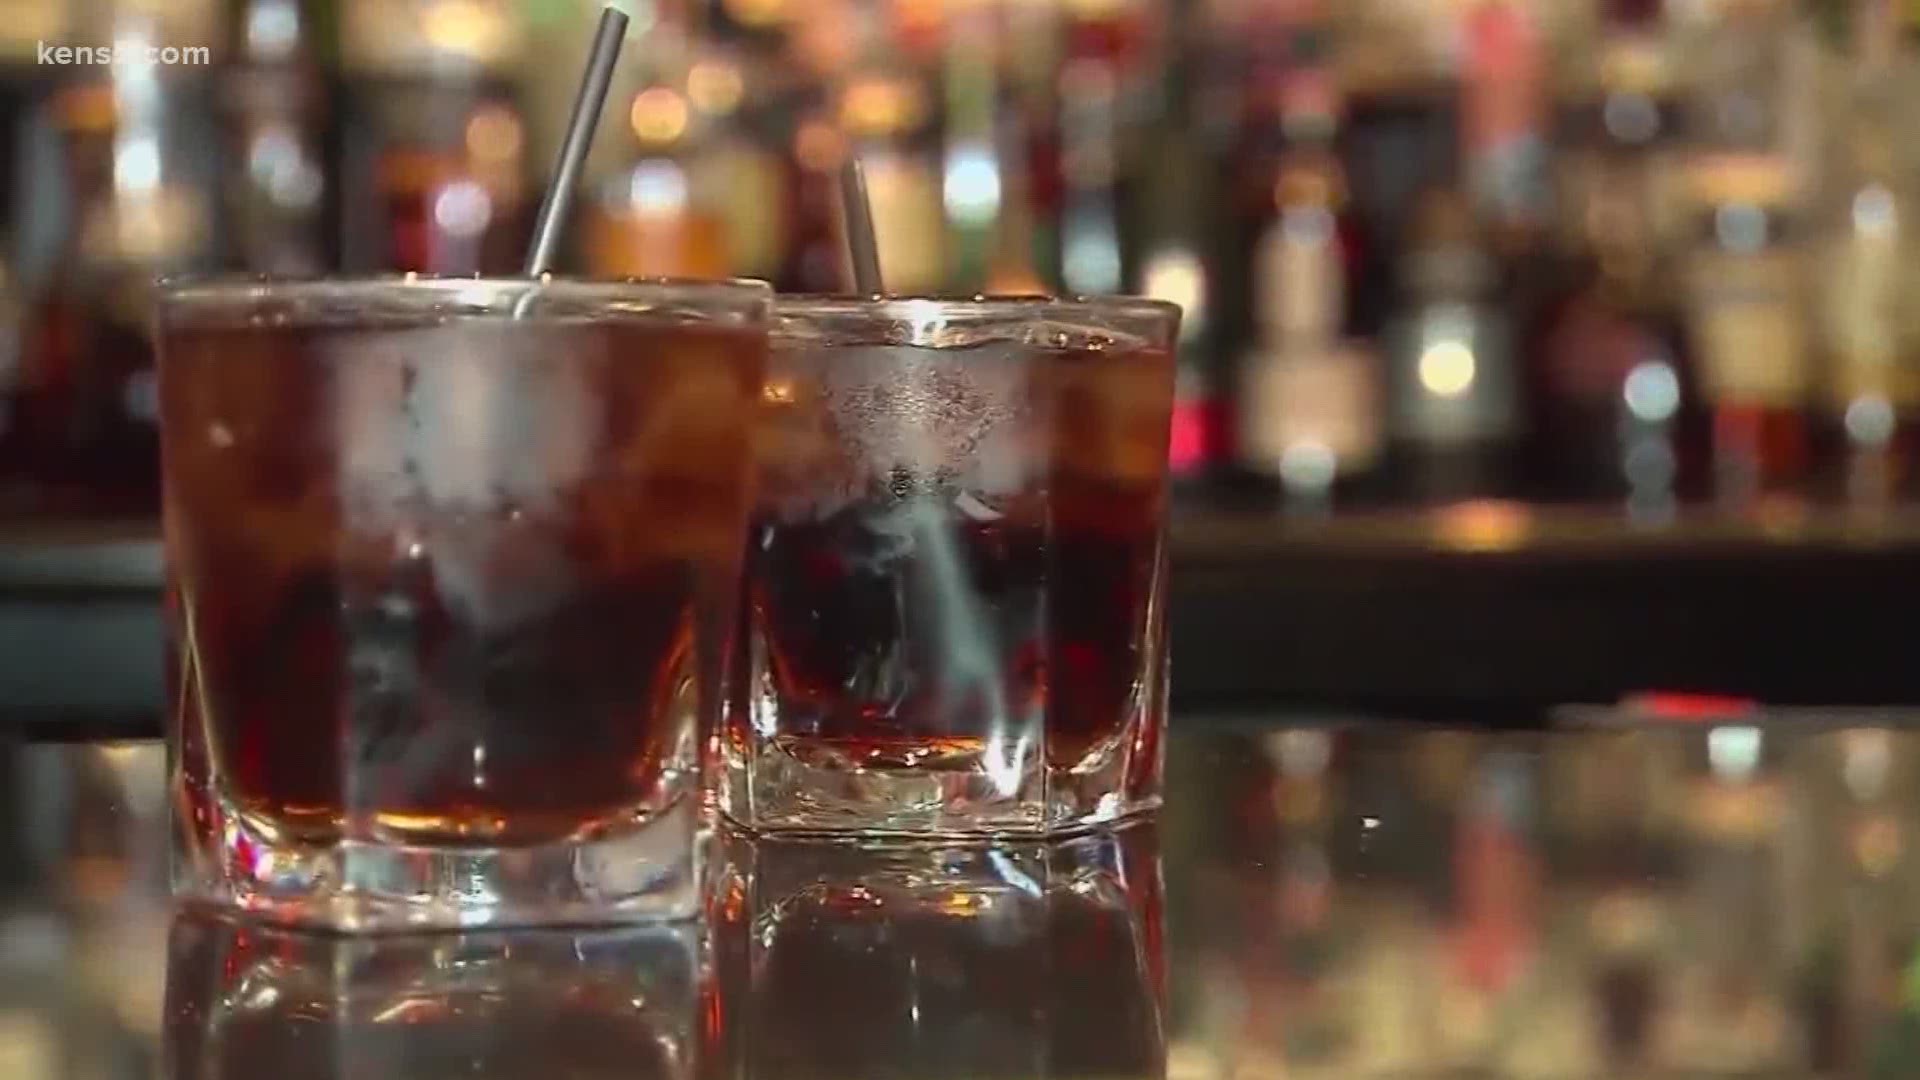 Several bar owners are suing the state saying they should be open with other restaurants. Do you agree?